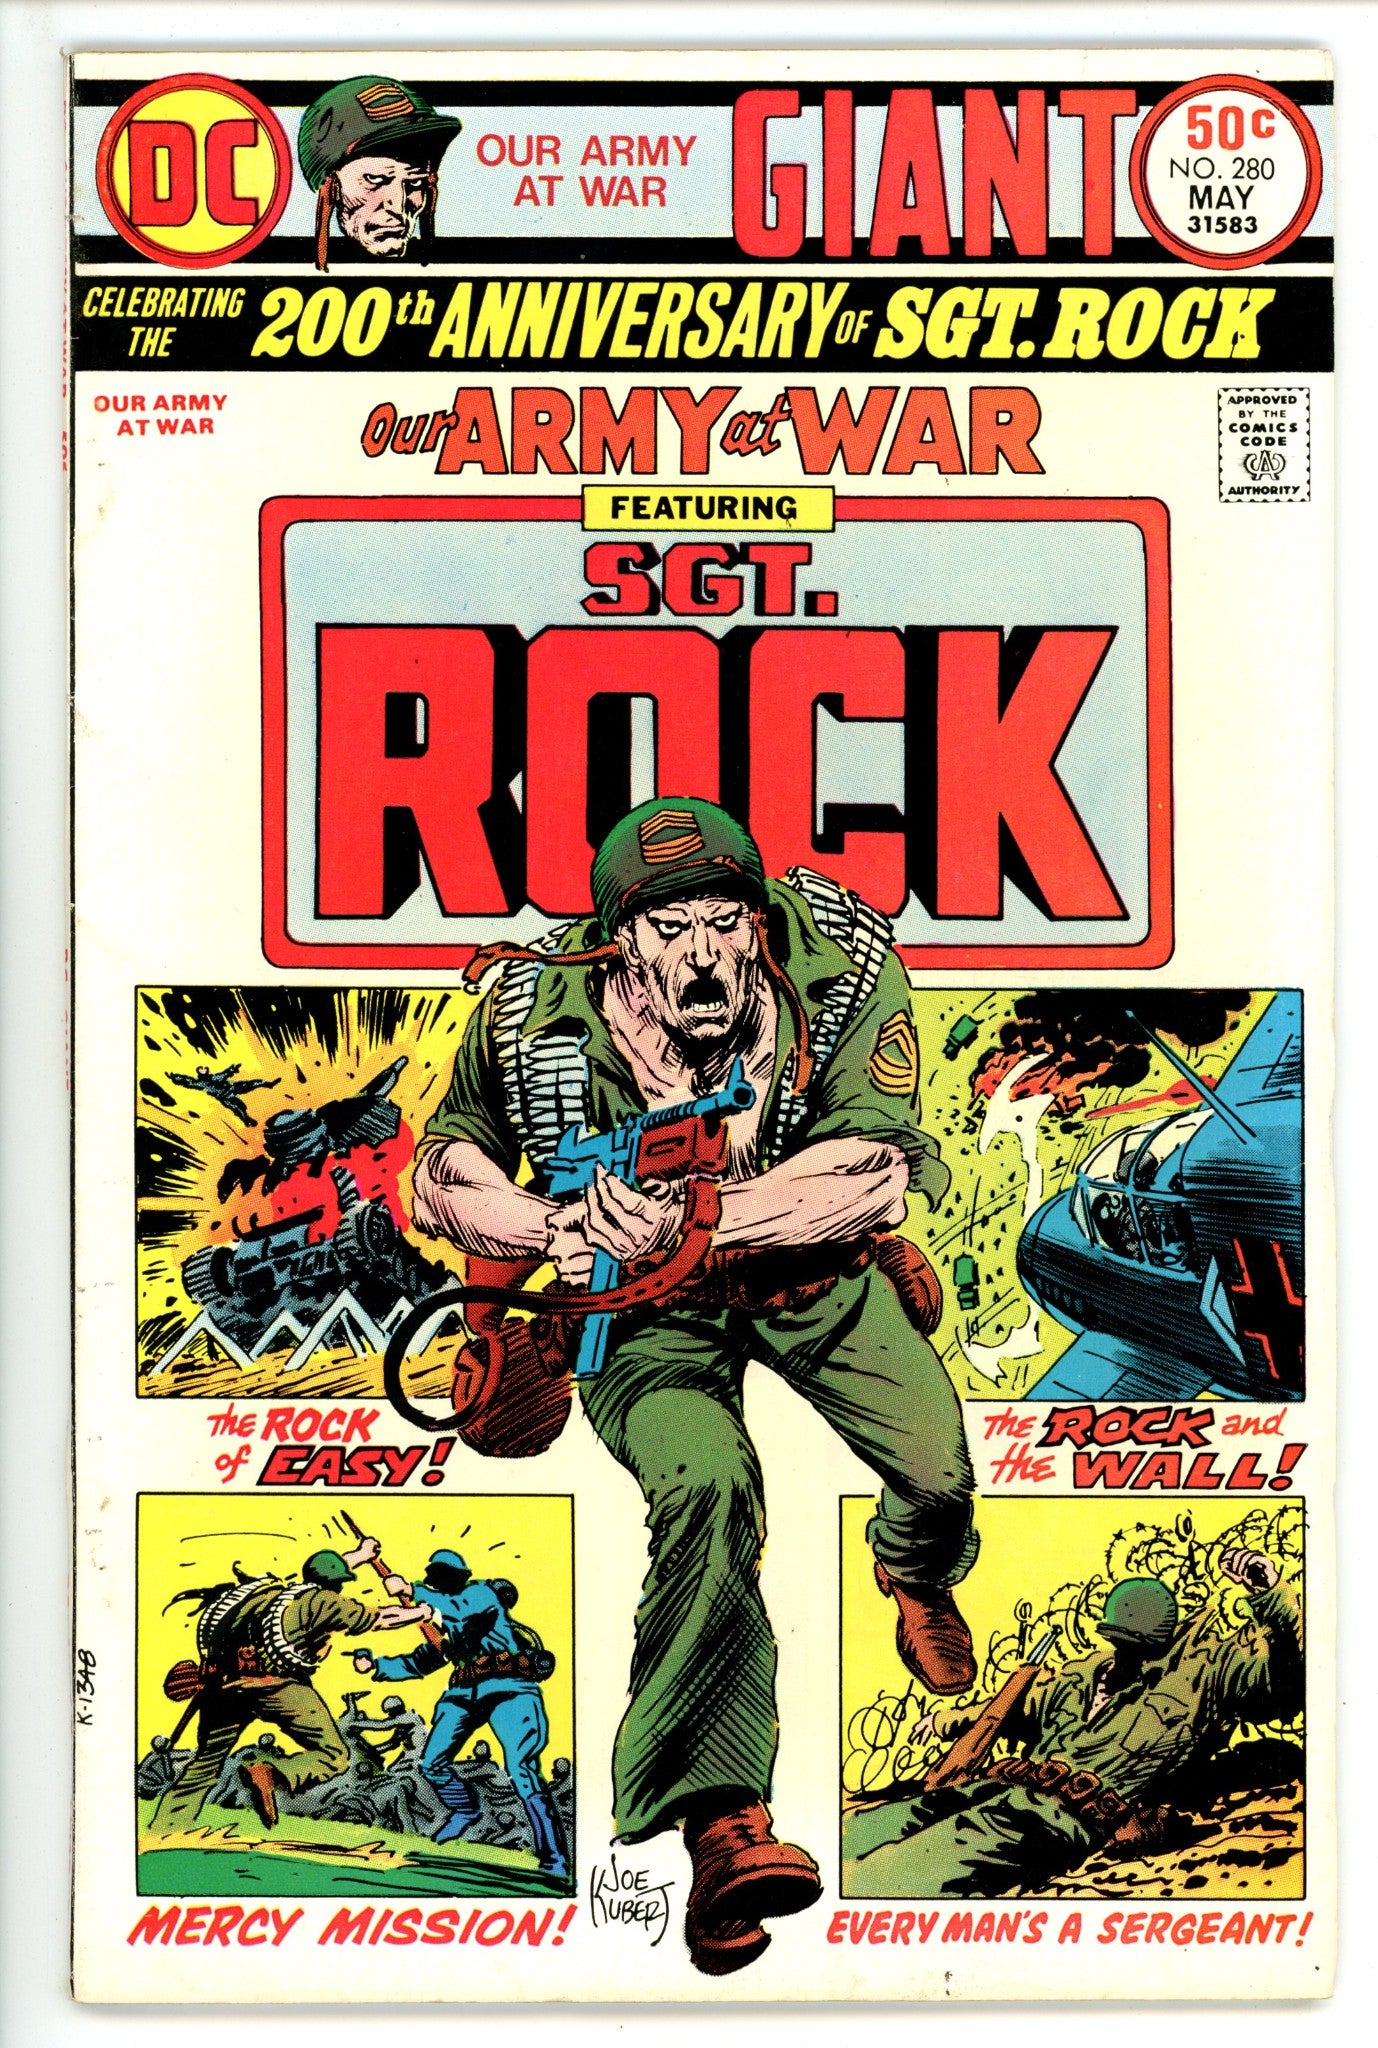 Our Army at War Vol 1 280 FN+ (6.5) (1975) 